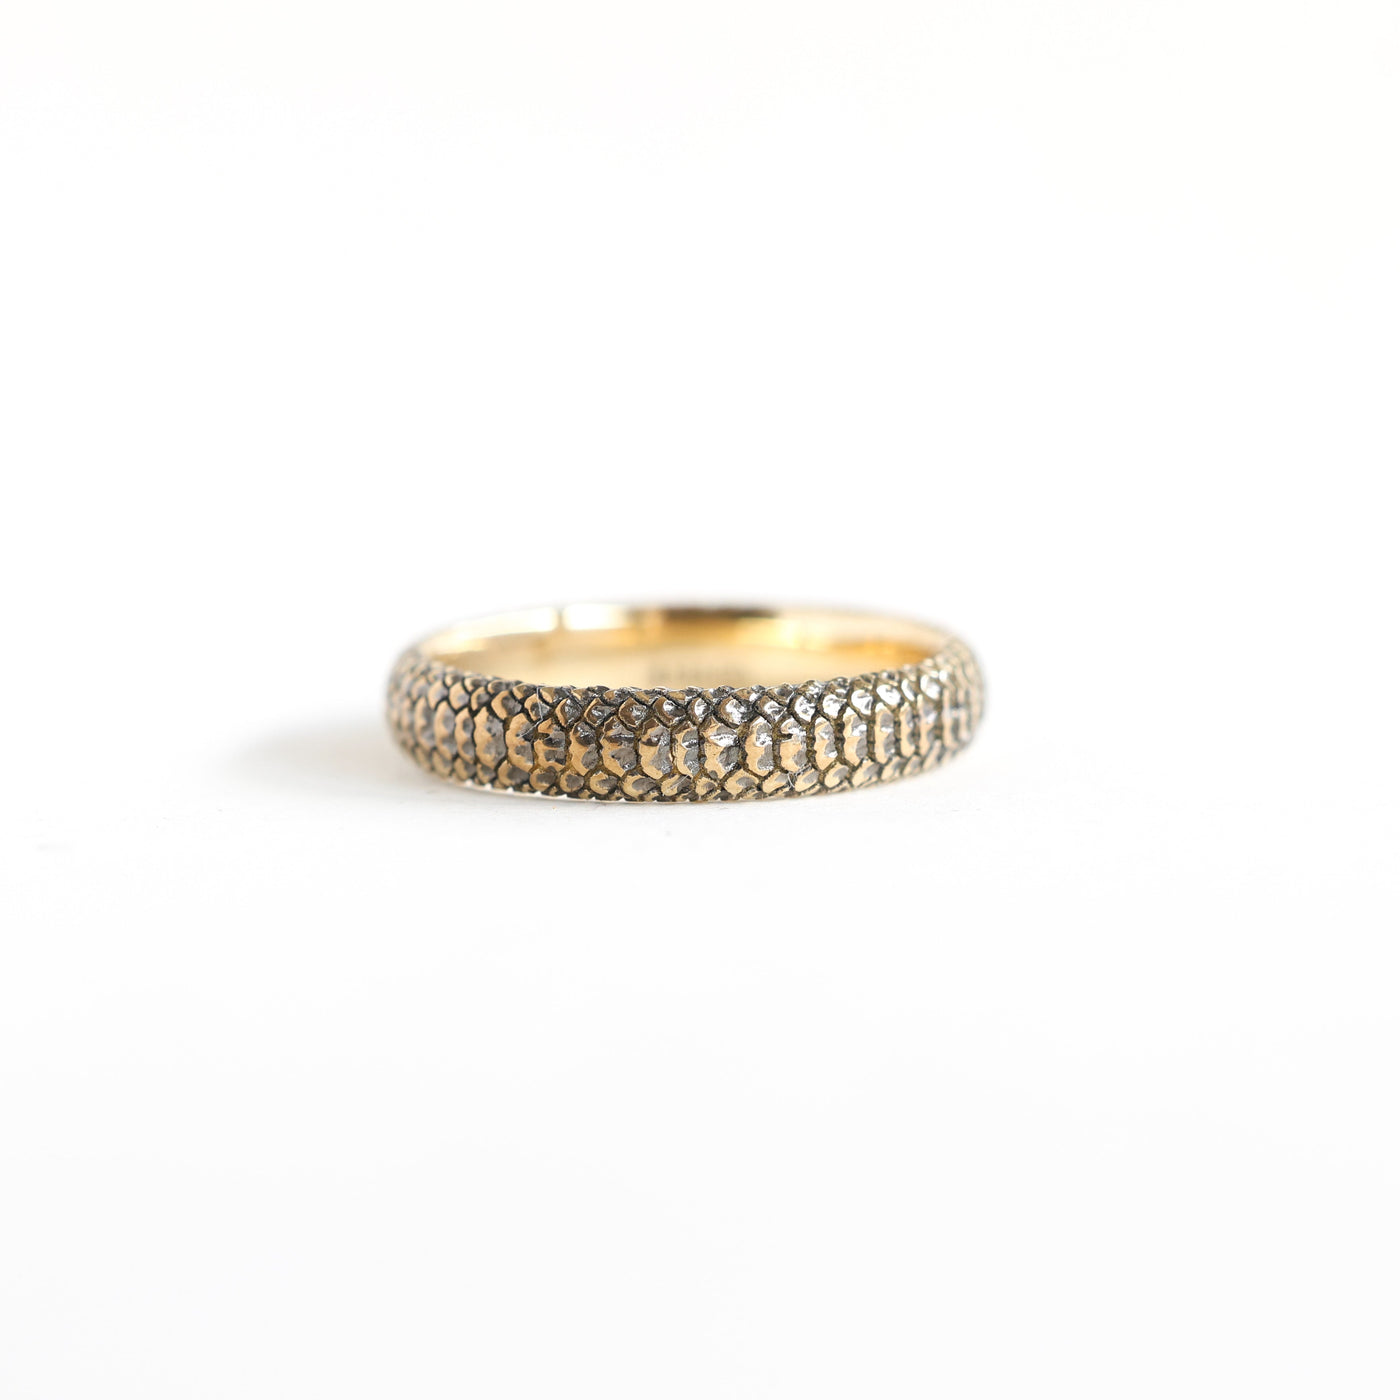 Gold snake textured ring with 14k rose gold band, customizable with gemstones.